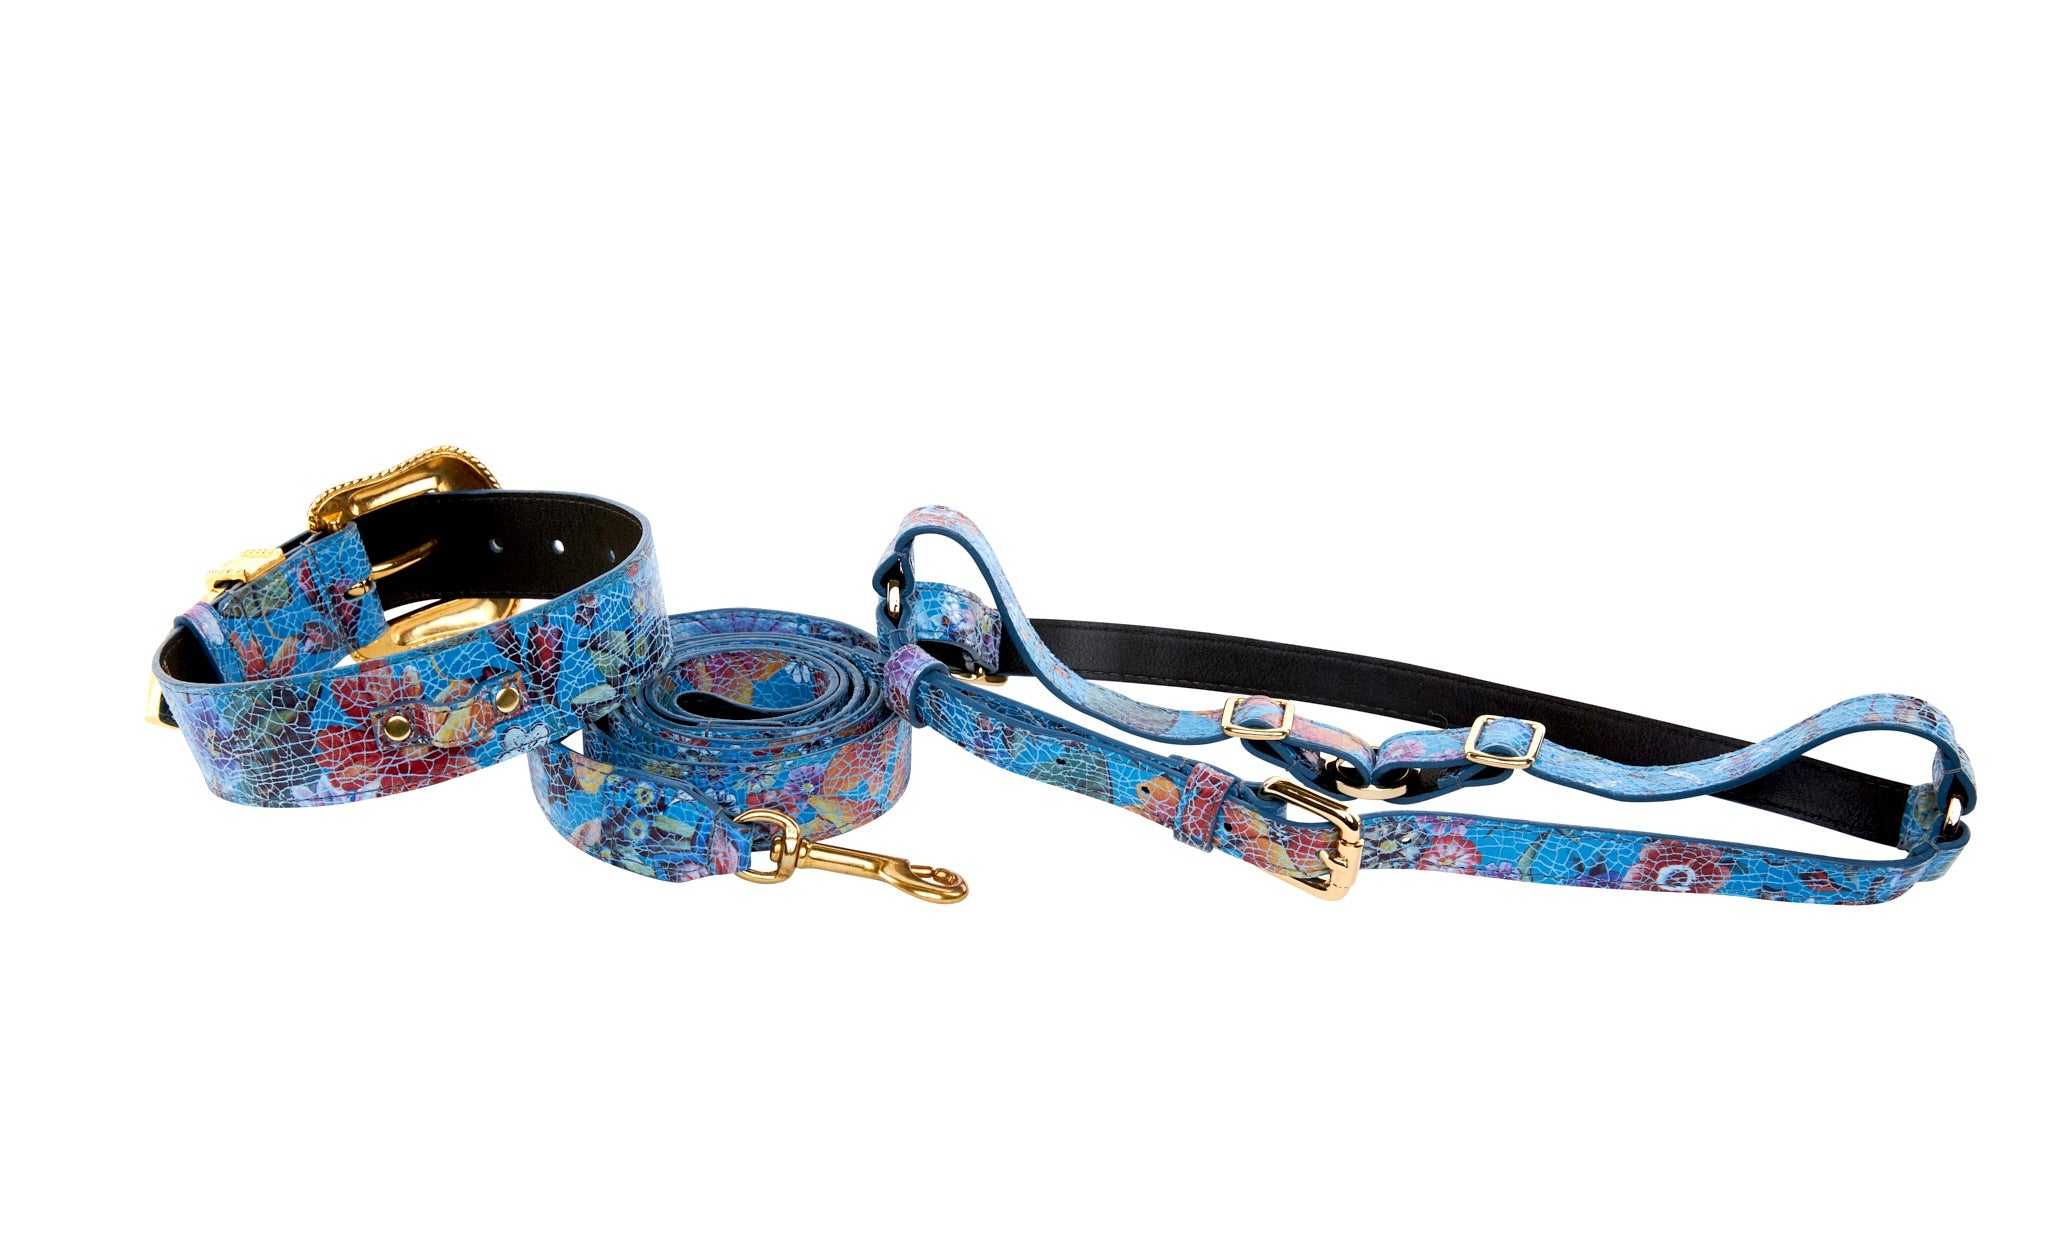 Floral Leather Collar & Leash